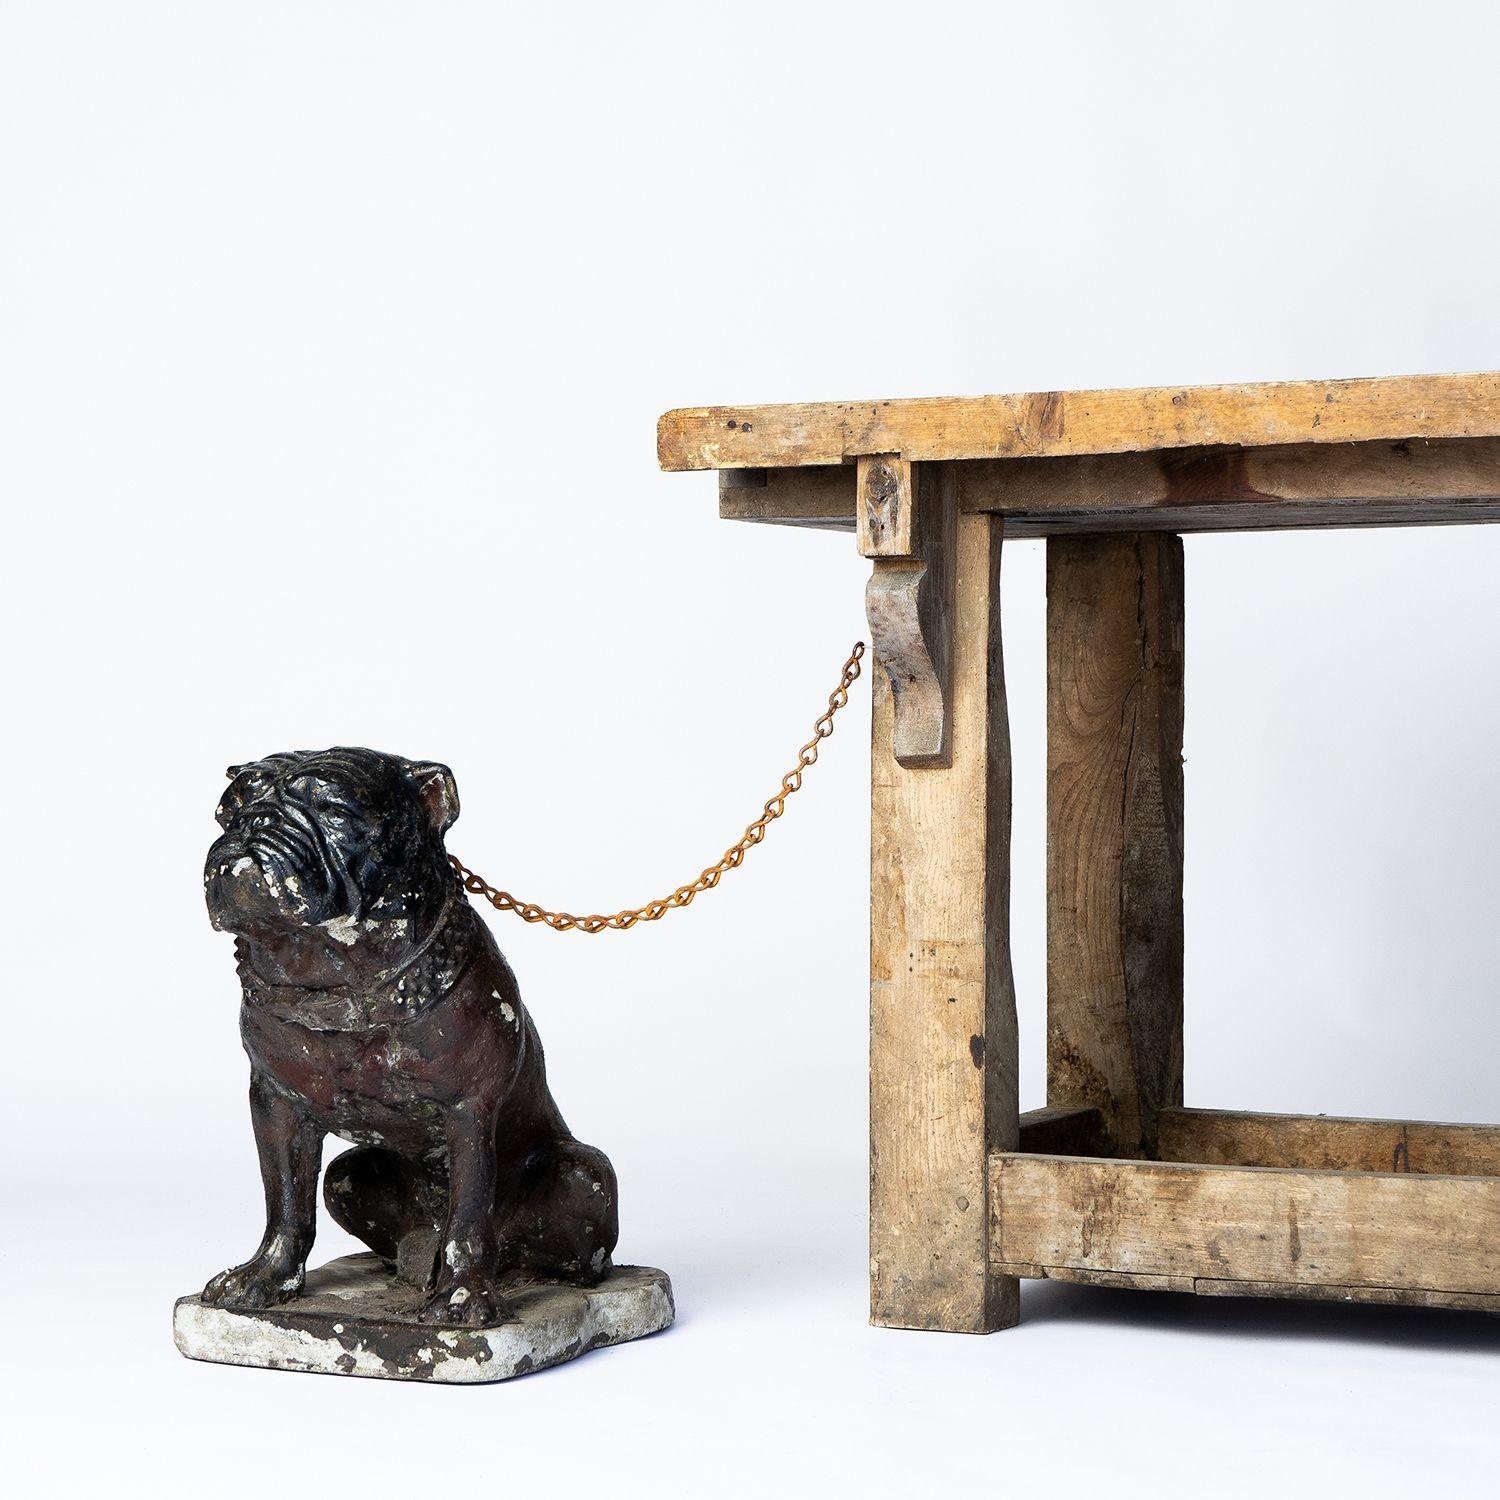 Vintage Cast Outdoor Dog Sculpture

A charming addition to any garden but also looks great in the house.

Dating to the early 20th century, probably somewhere near the 1920s.

Naturally worn surface with remnants of the original thick treacle